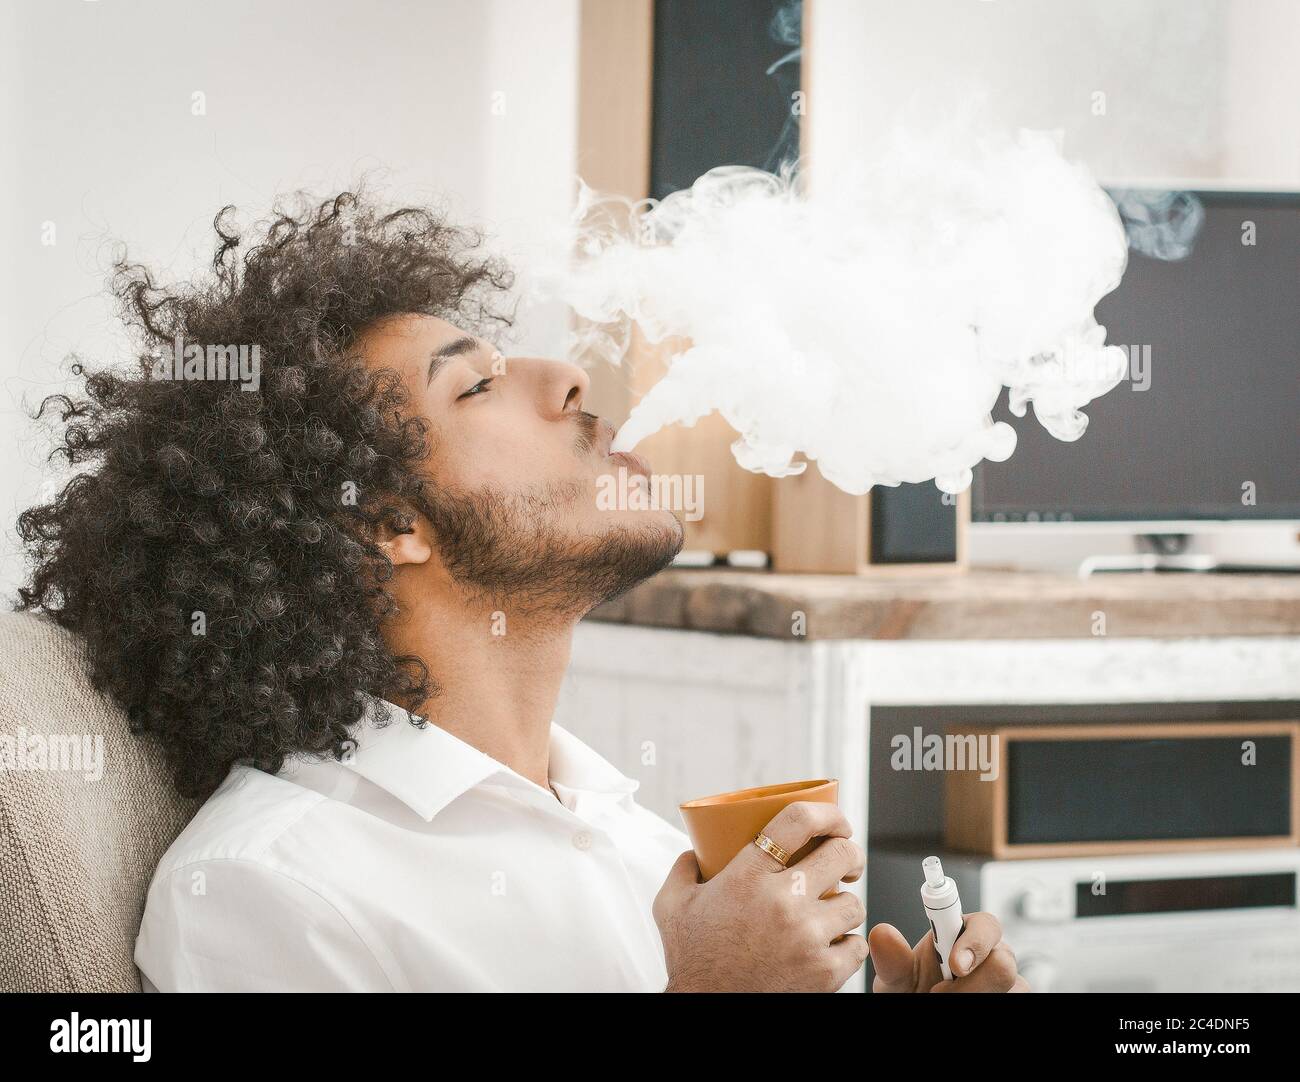 Profile view of shaggy man smoking of e-cigarette and drinking coffee. Copy space in white smoke cloud. Close up shot. Tinted image Stock Photo